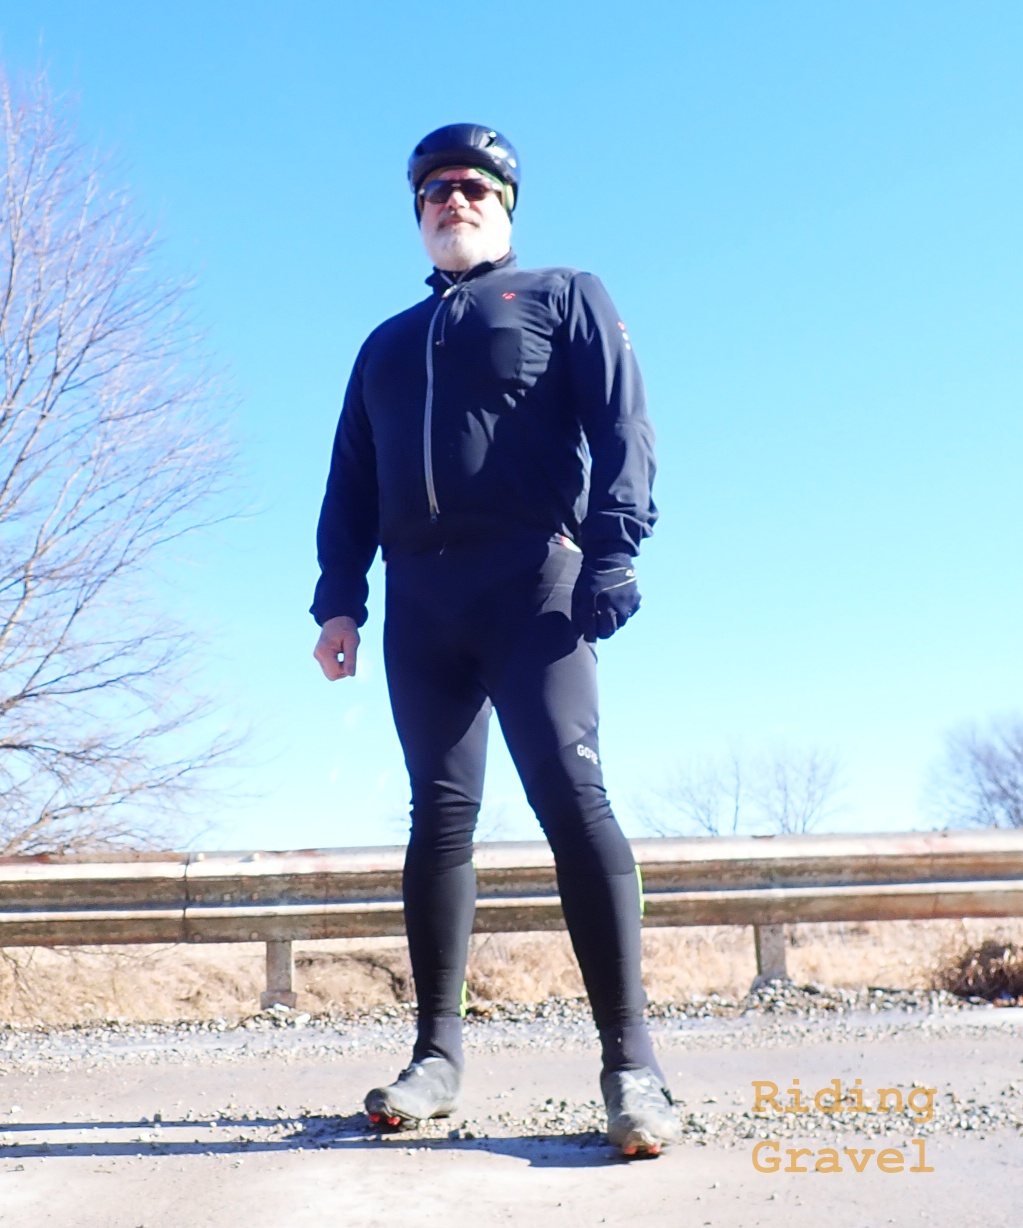 Gore Wear Winter Apparel Review - Adaptable for Adventure